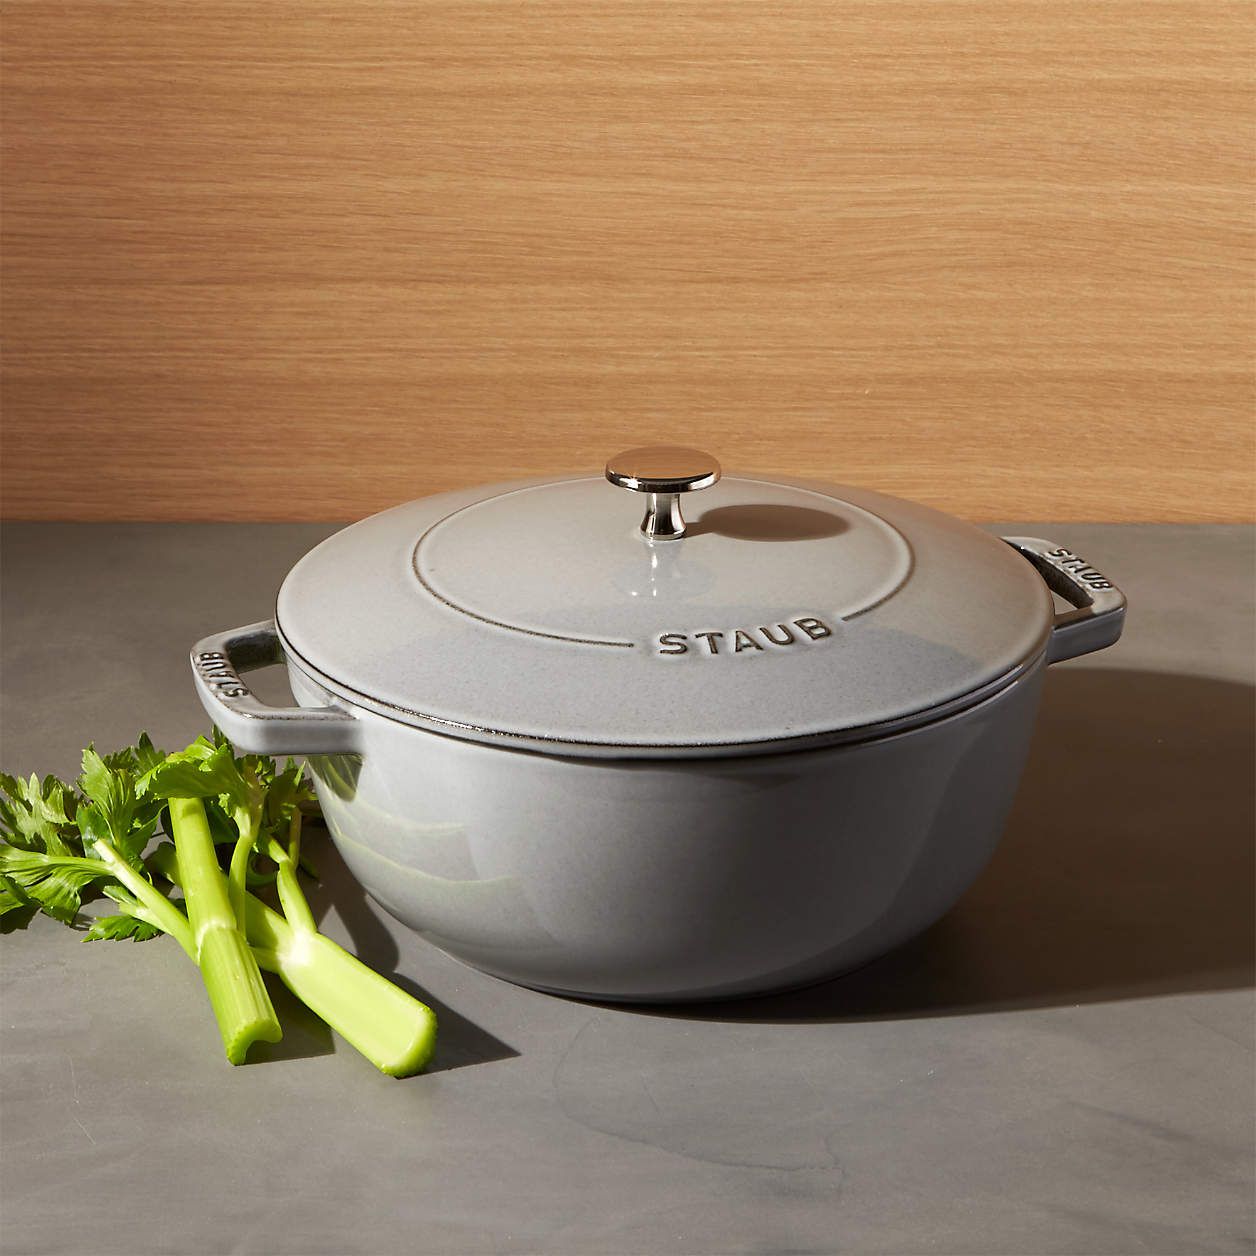 staub french oven